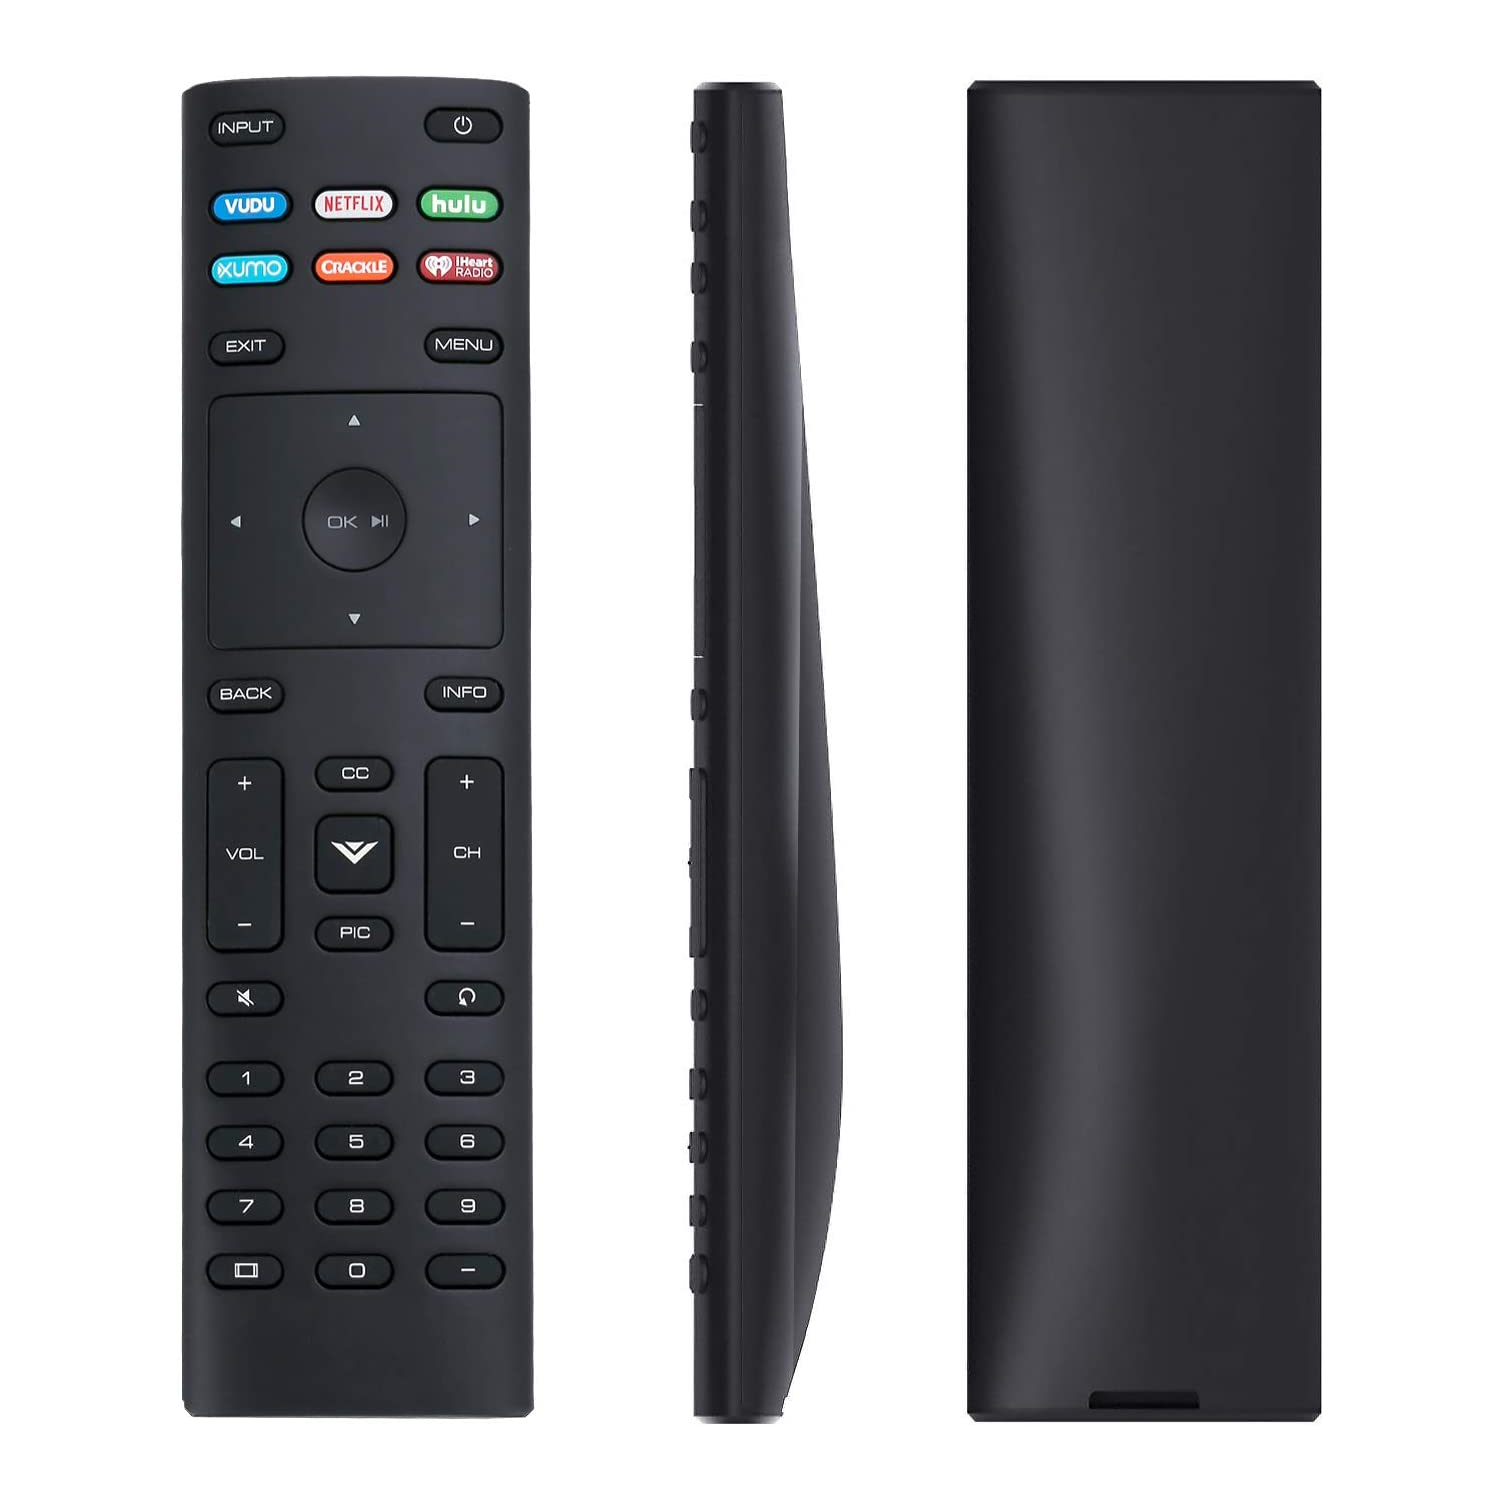 AULCMEET XRT136 Remote Control Compatible with VIZIO 4K TV 2017 P Series P Series Quantum P55-F1 P65-F1 P75-F1 PQ65-F1 M55-F0M65-F0 M70-F3 V505-G9